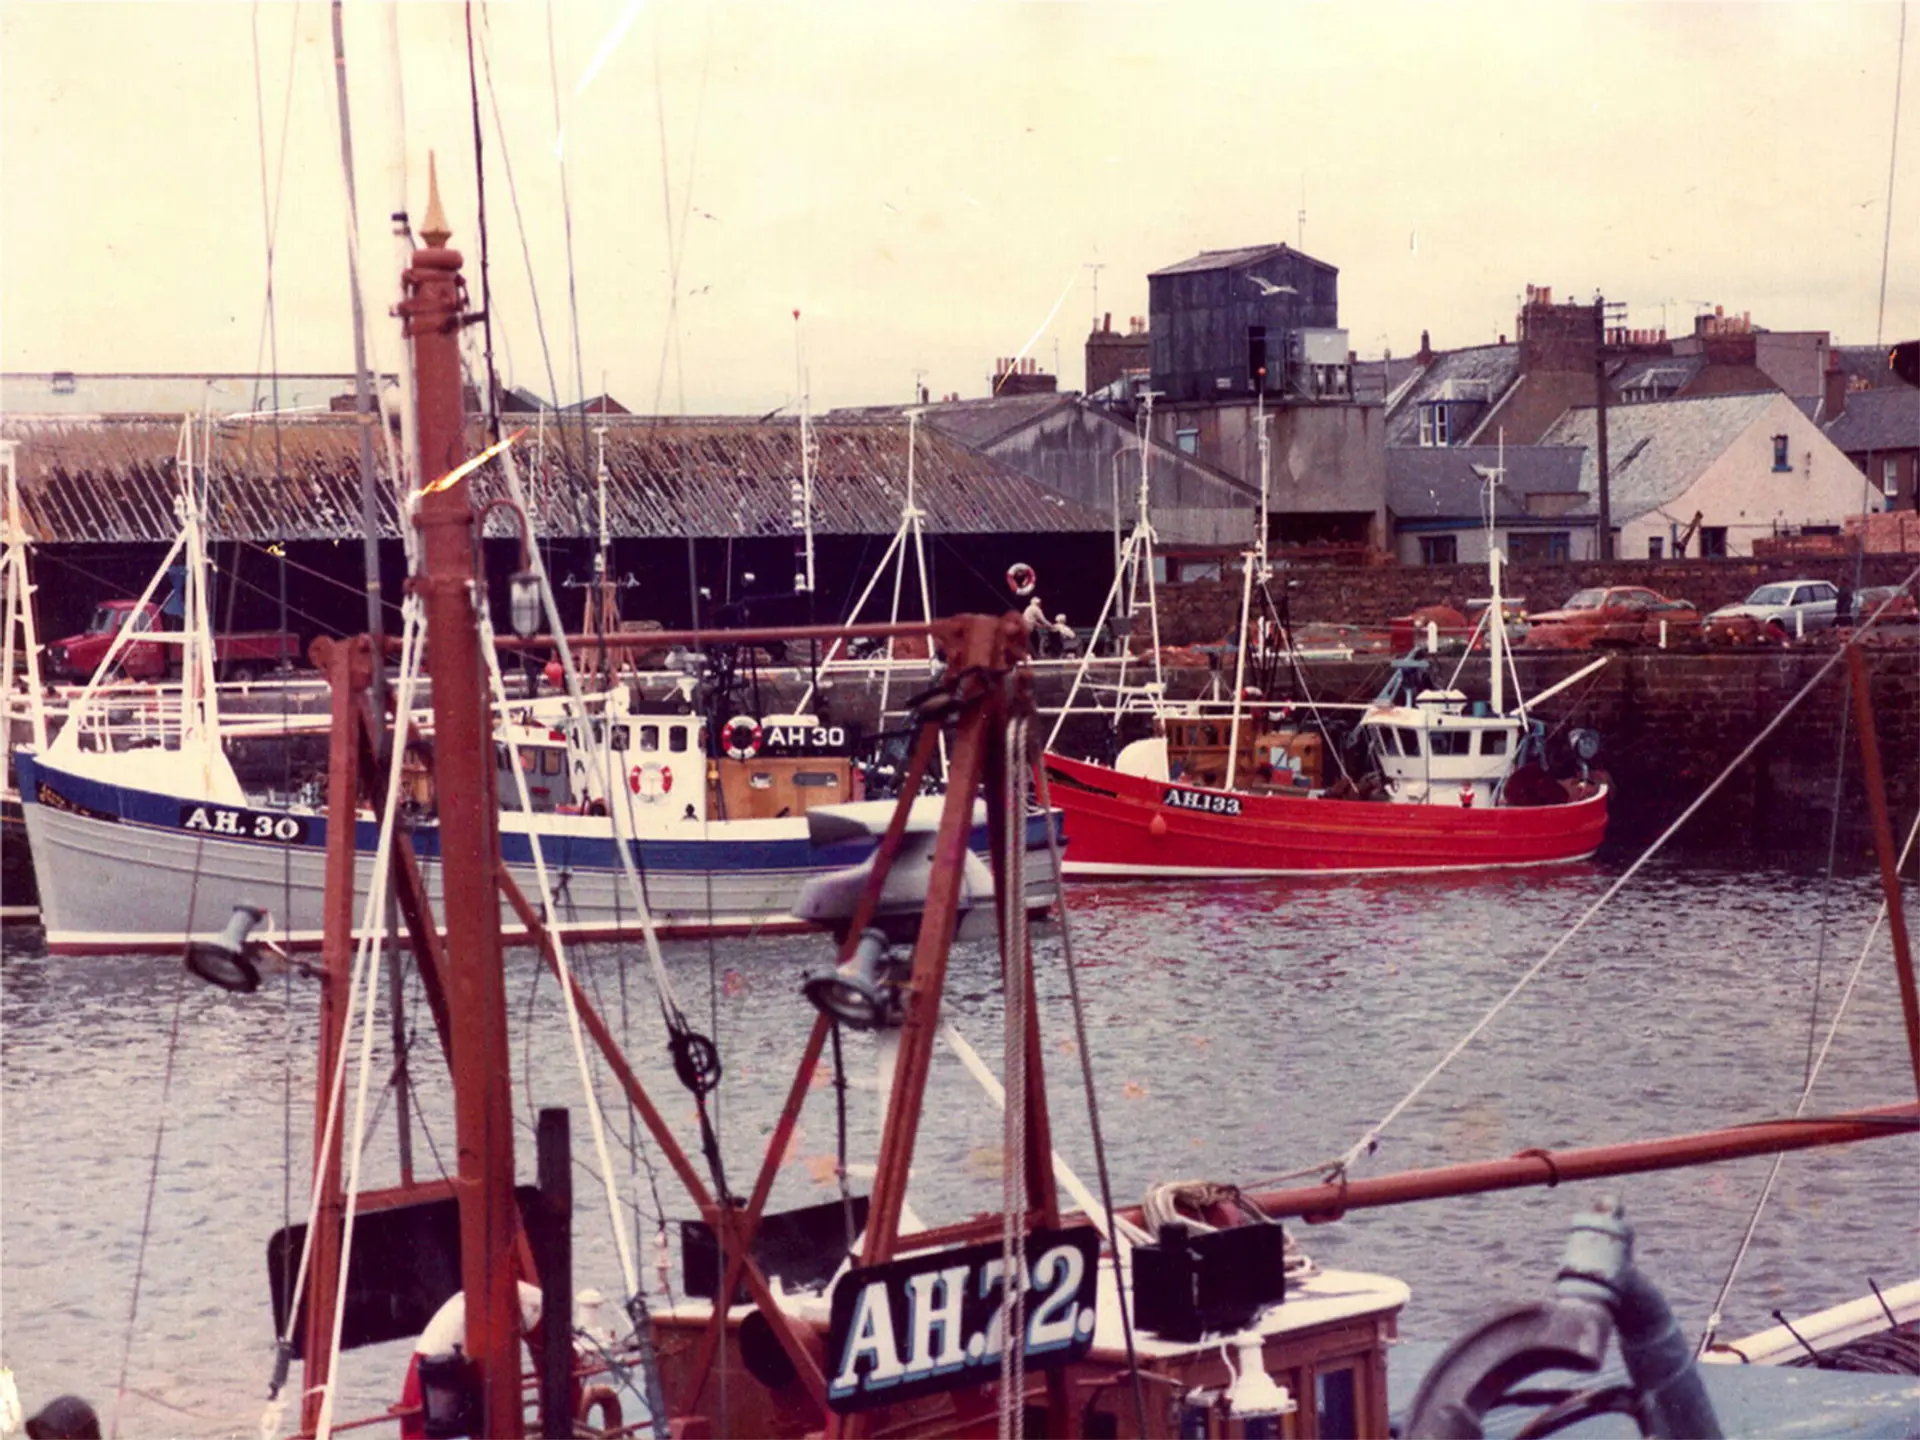 An image of Arbroath harbour from the past. We are looking through the mast of a boat, and can clearly see two fishing boats, one red and one white and blue. 